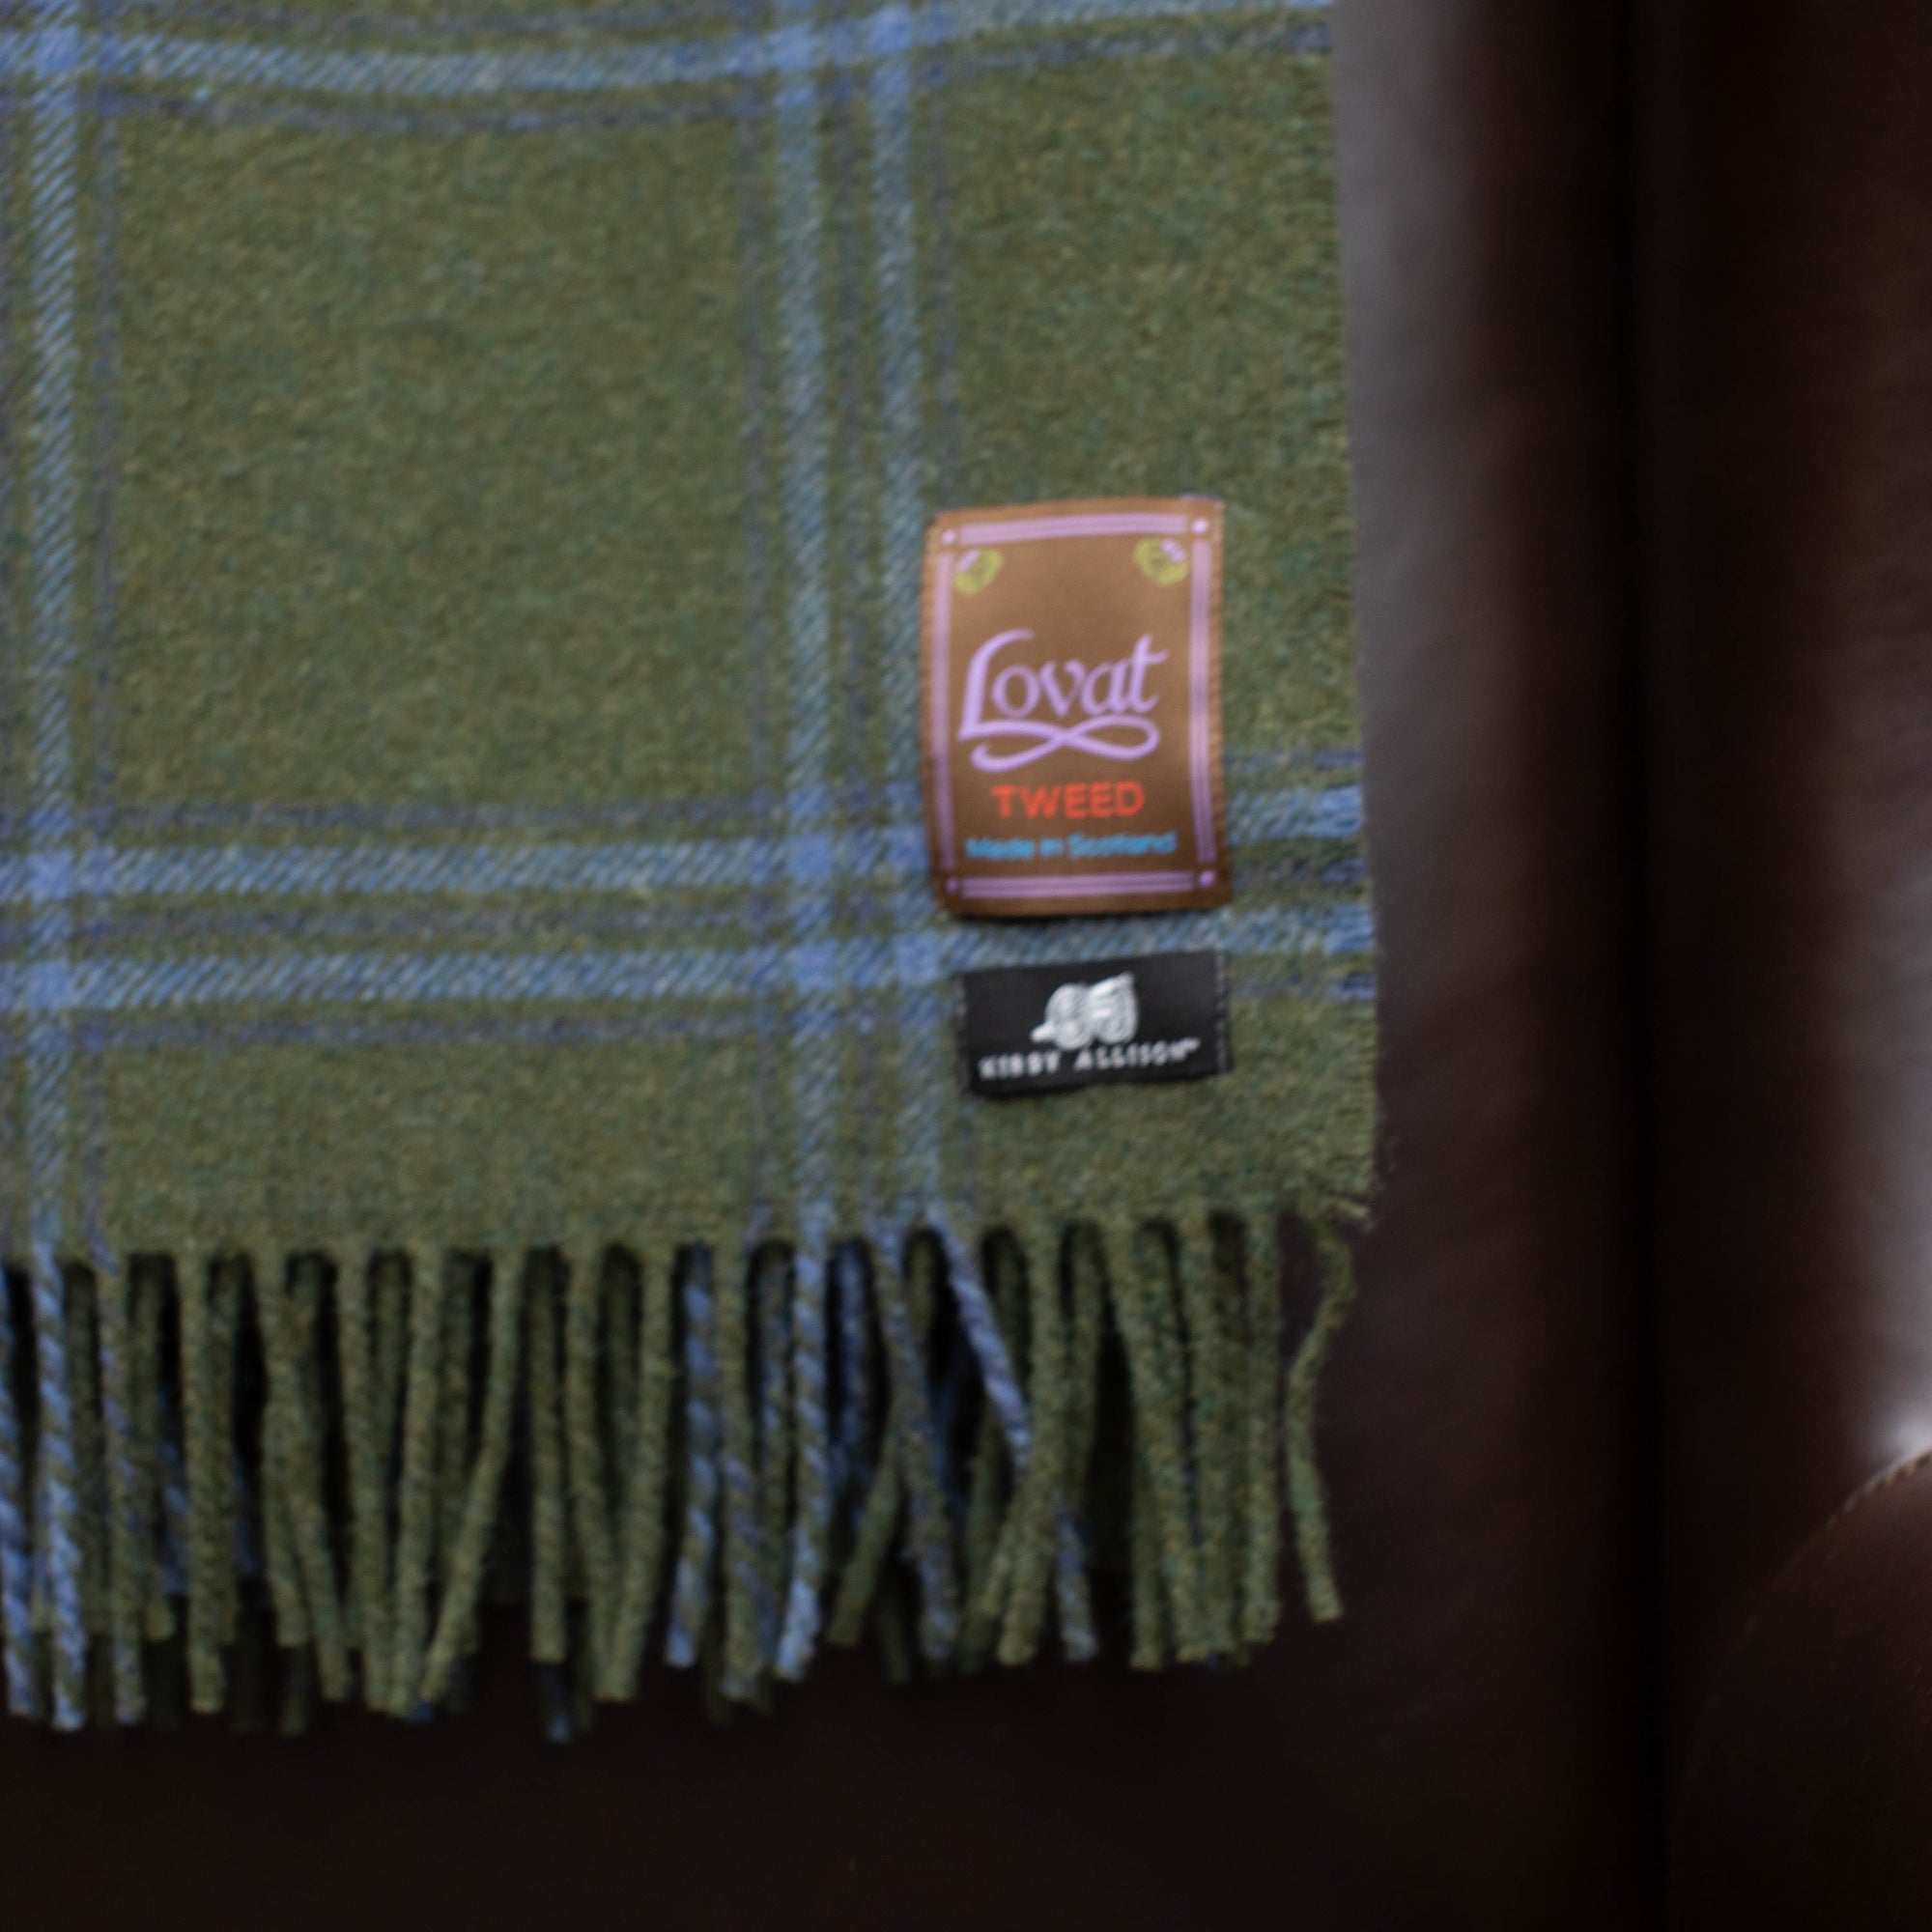 A green and blue plaid Kirby Allison Lovat Mill Suit to Shoot Tweed wool throw blanket on a leather chair.